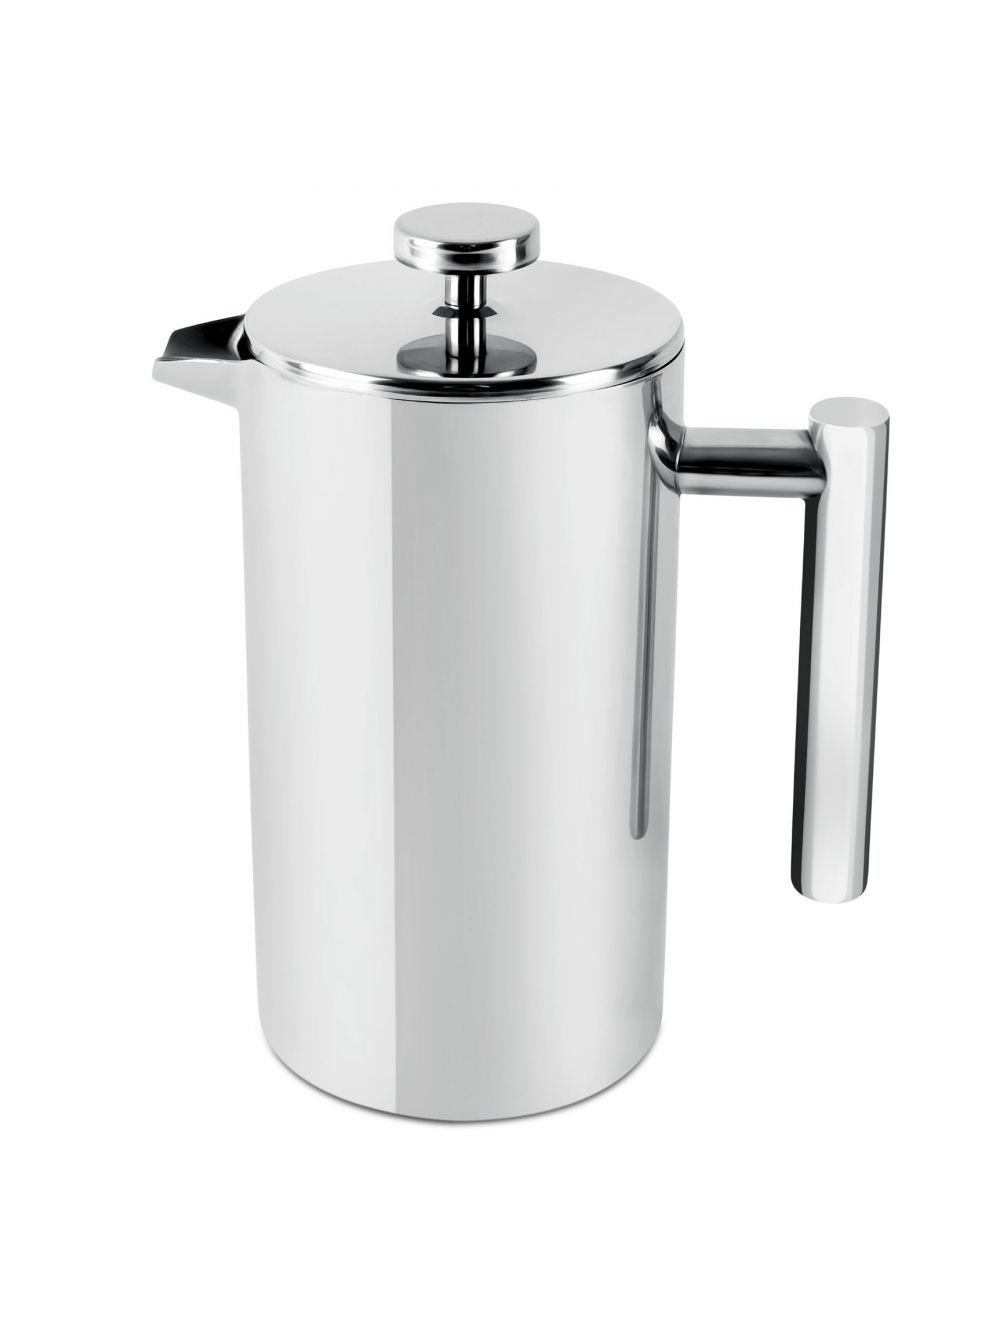 Royalford RFU9016 Cafetiere Portable French Press Coffee Maker 1L